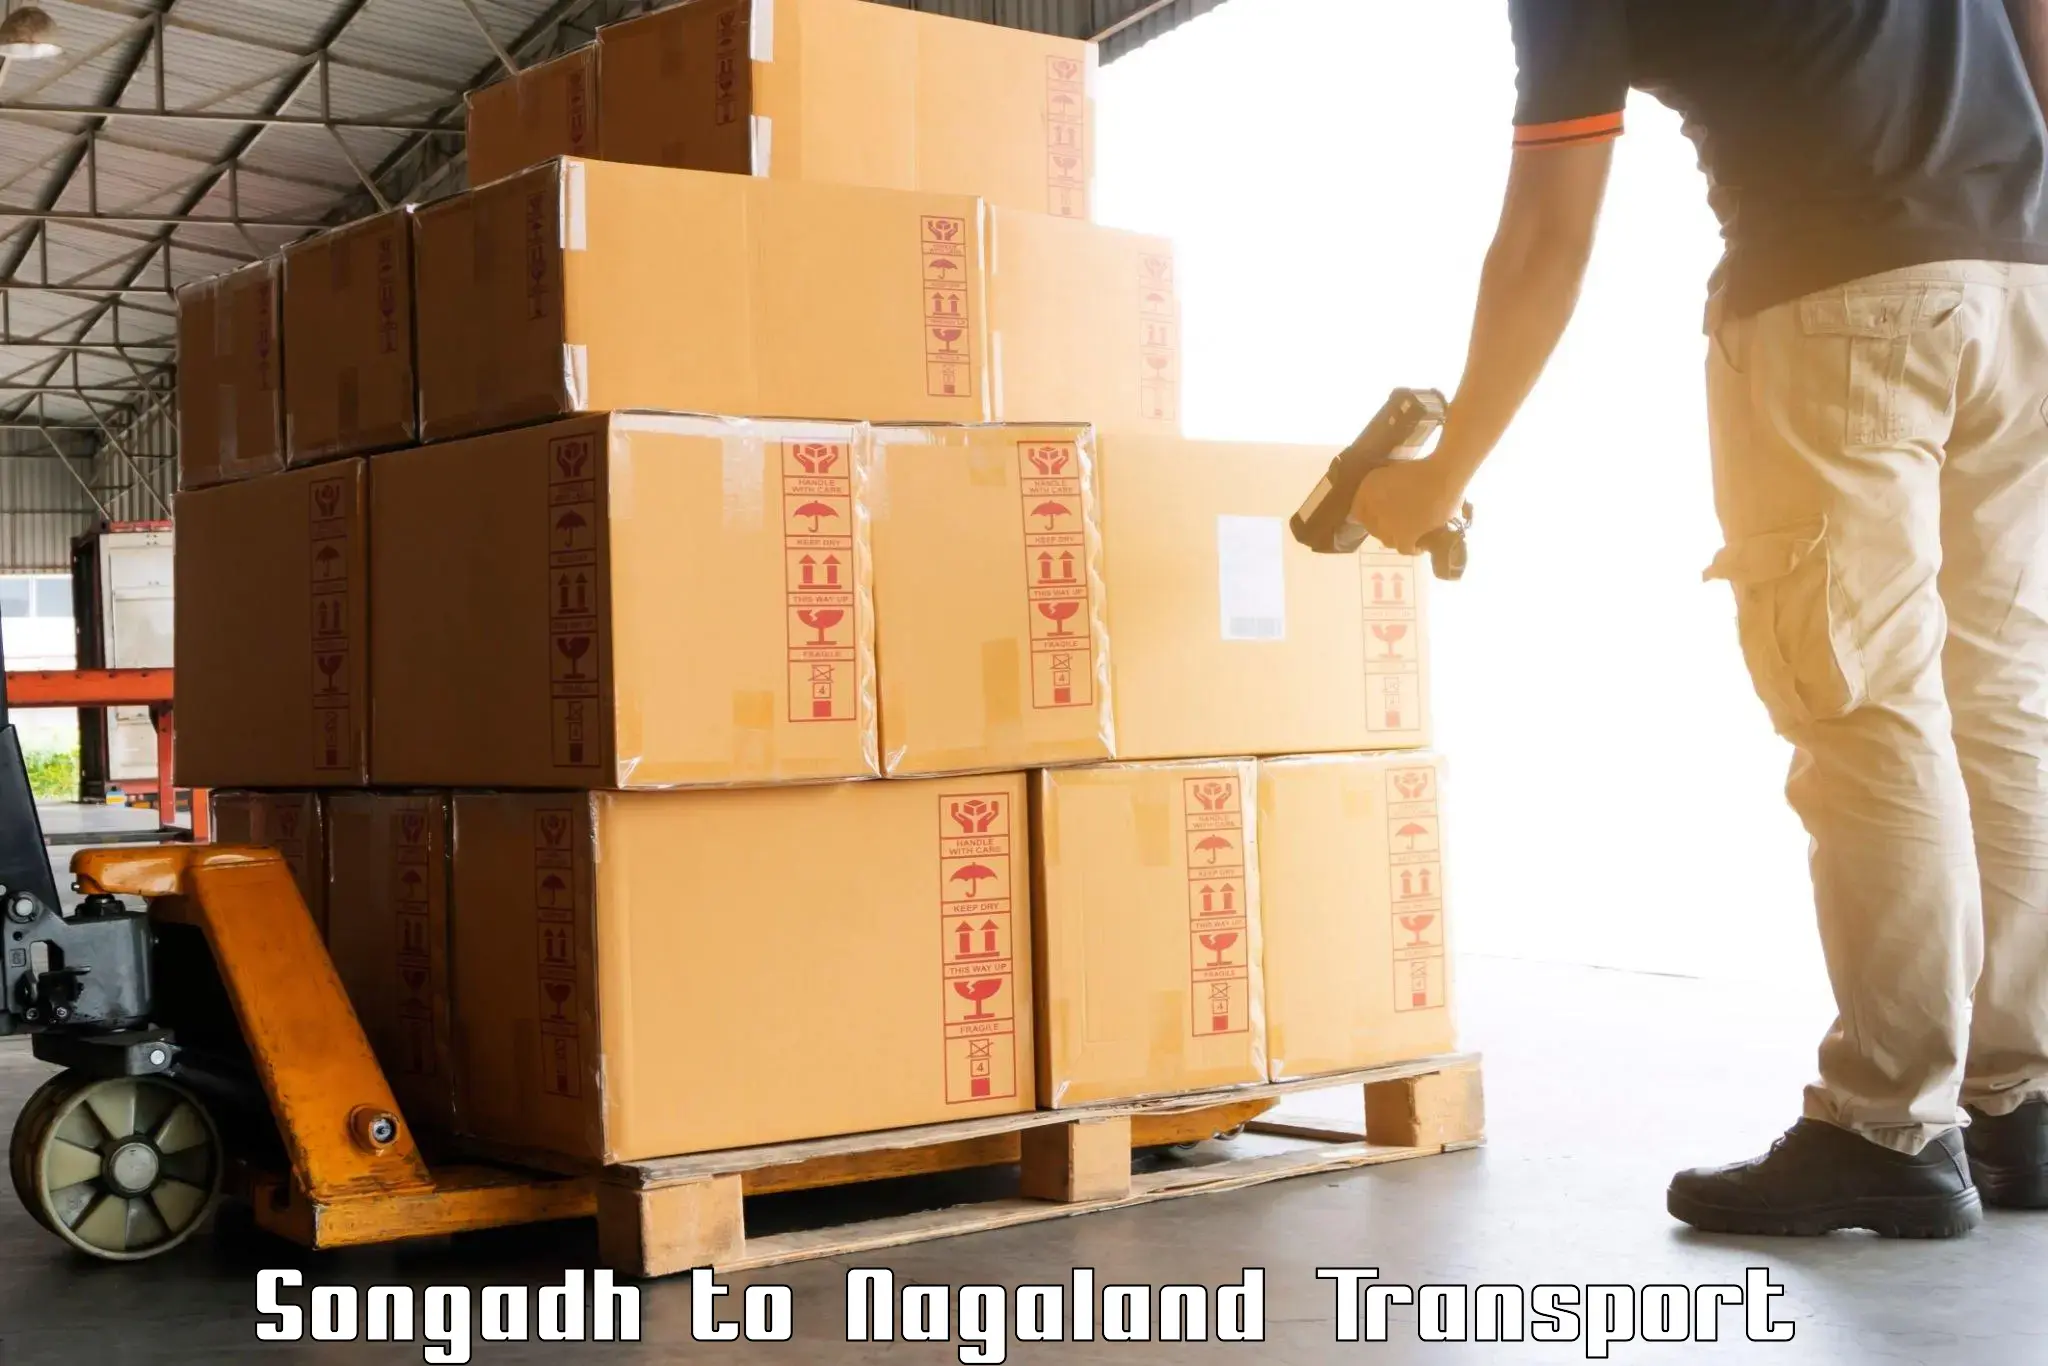 Truck transport companies in India Songadh to Nagaland